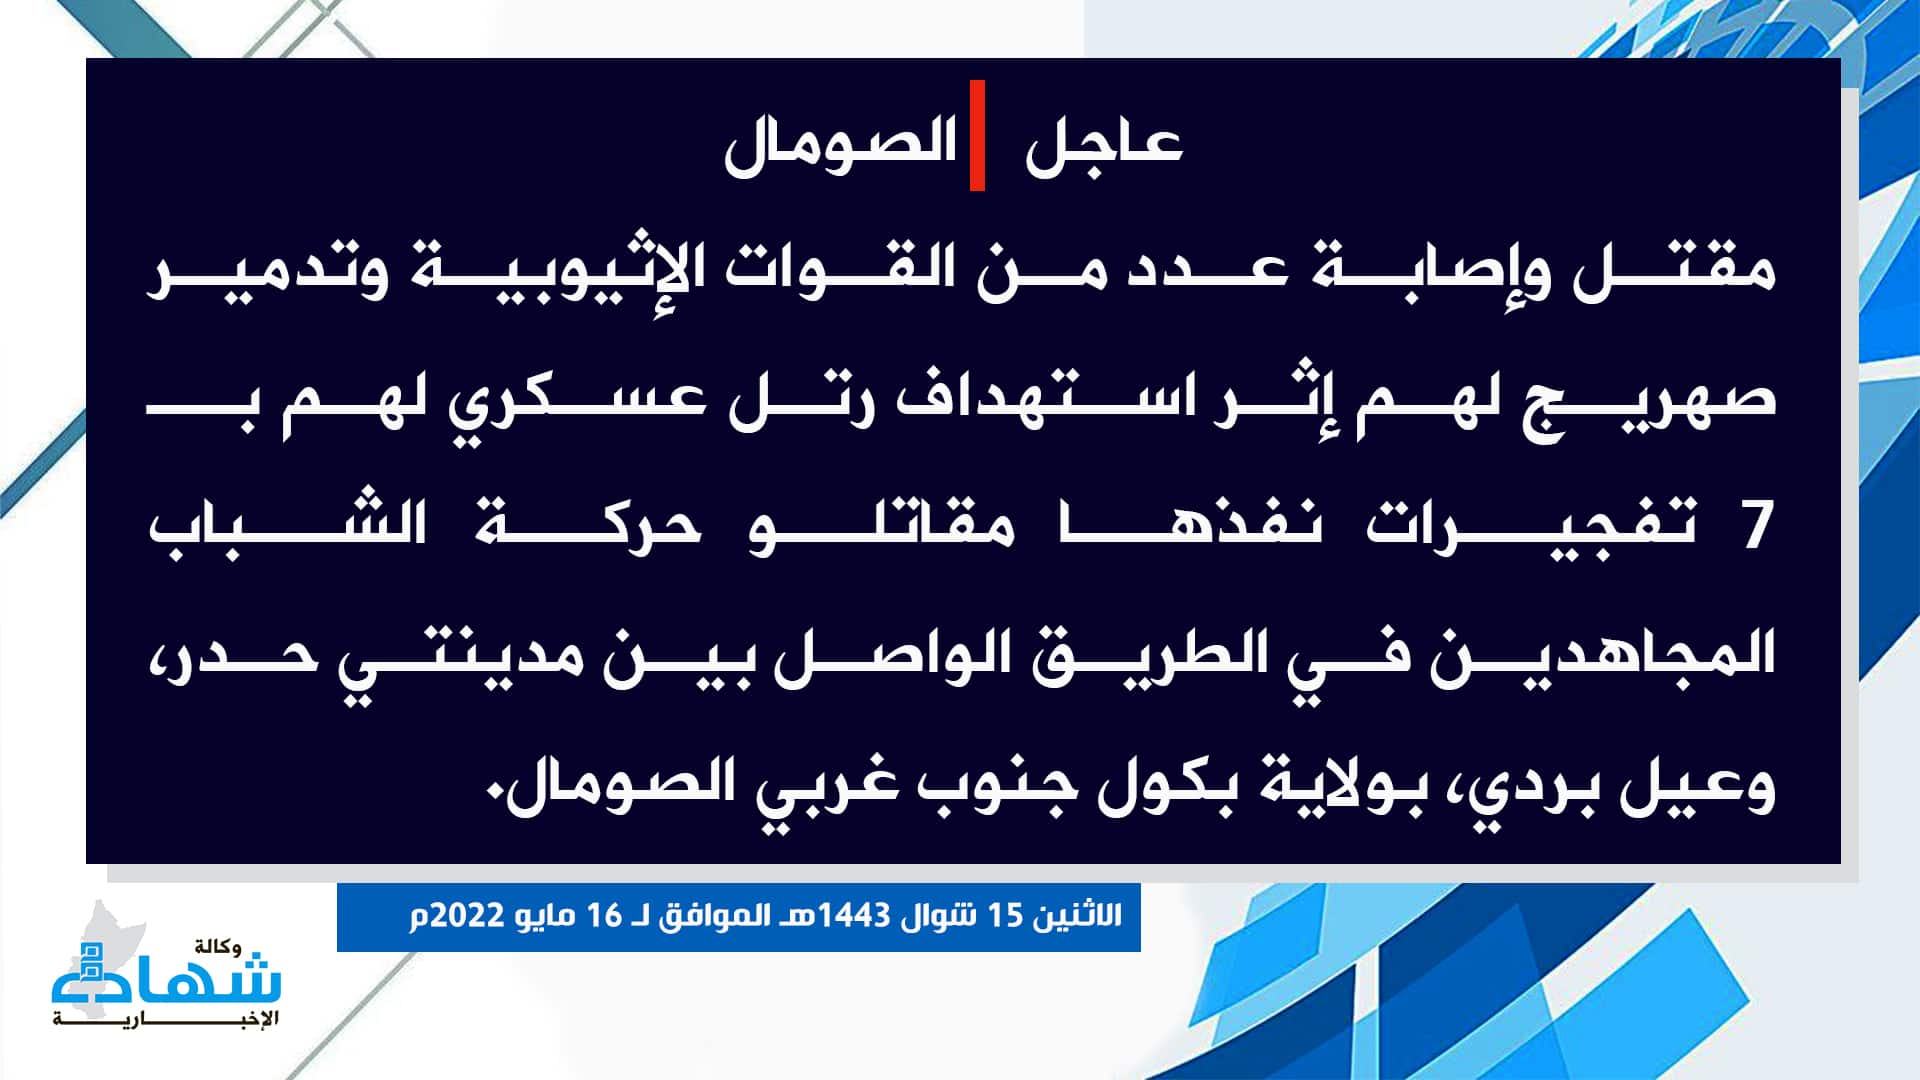 (Claim) al-Shabaab: Several Ethiopian Forces Were Killed and Injured in an Attack on a Military Convoy With Seven IEDs on the Road Between Hadar and Eil Bardi, Bakool State, Southwestern Somalia - 16 May 2022